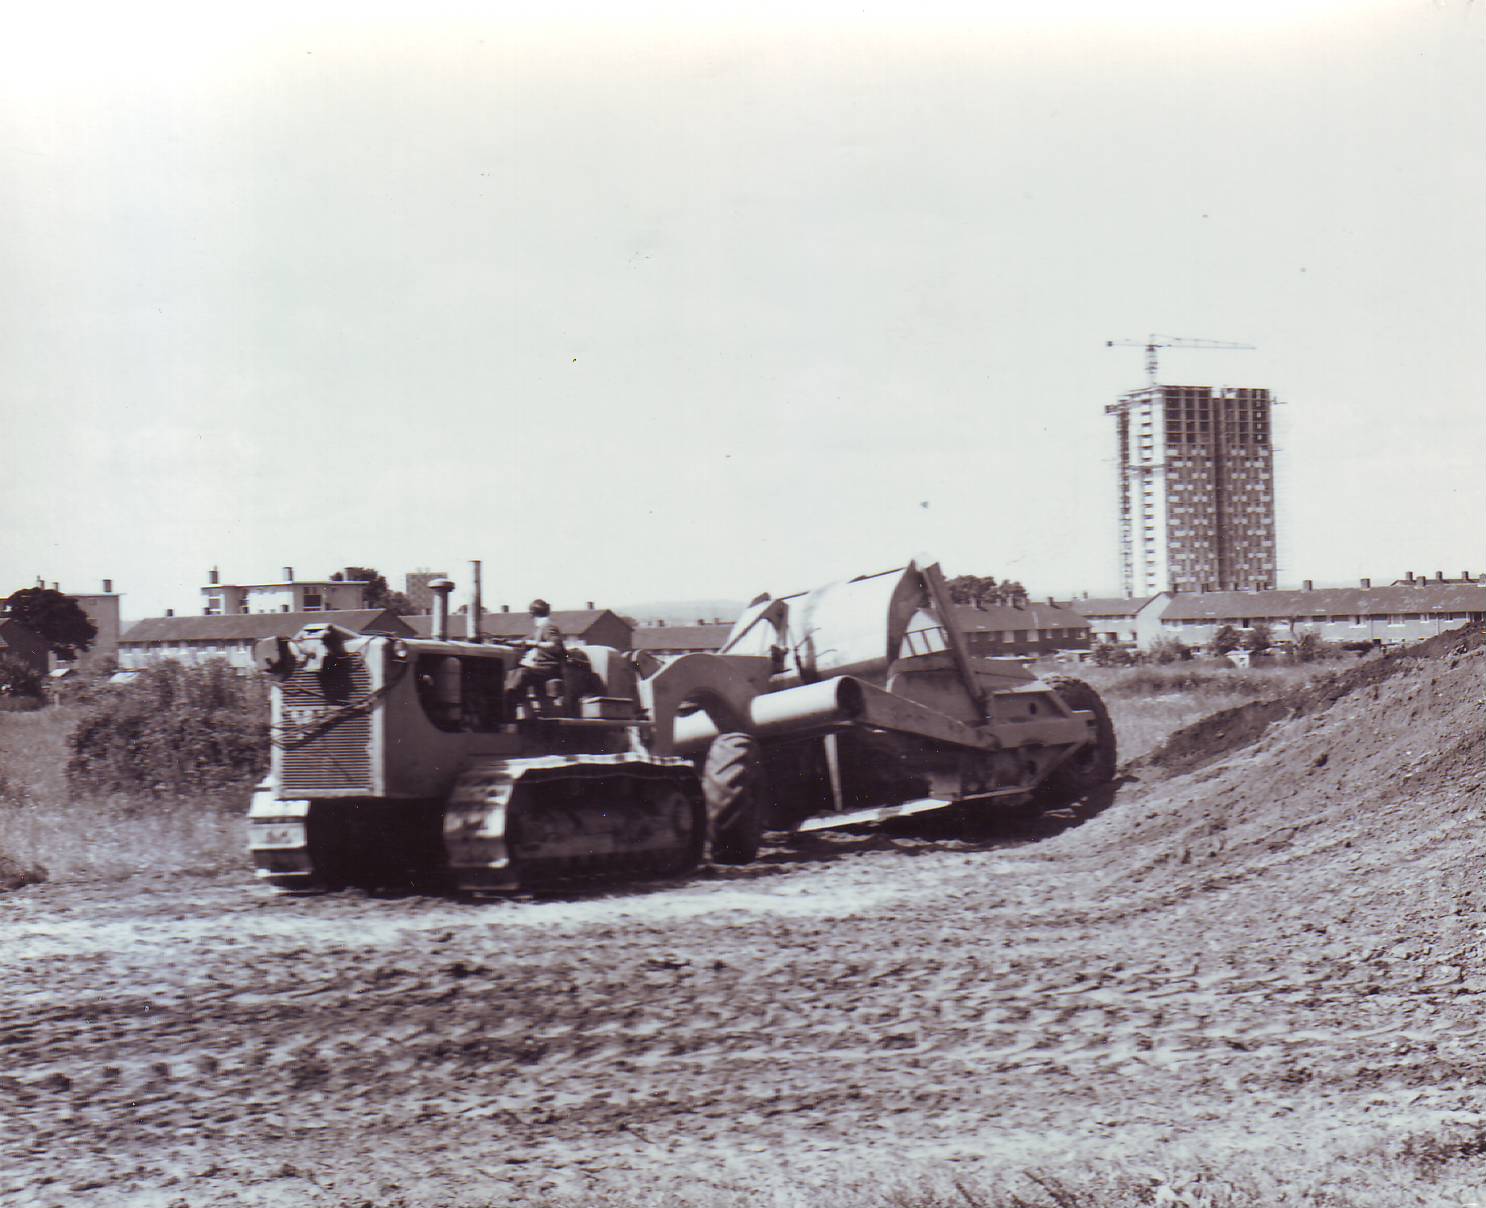 Site clearance works, Jul 1964